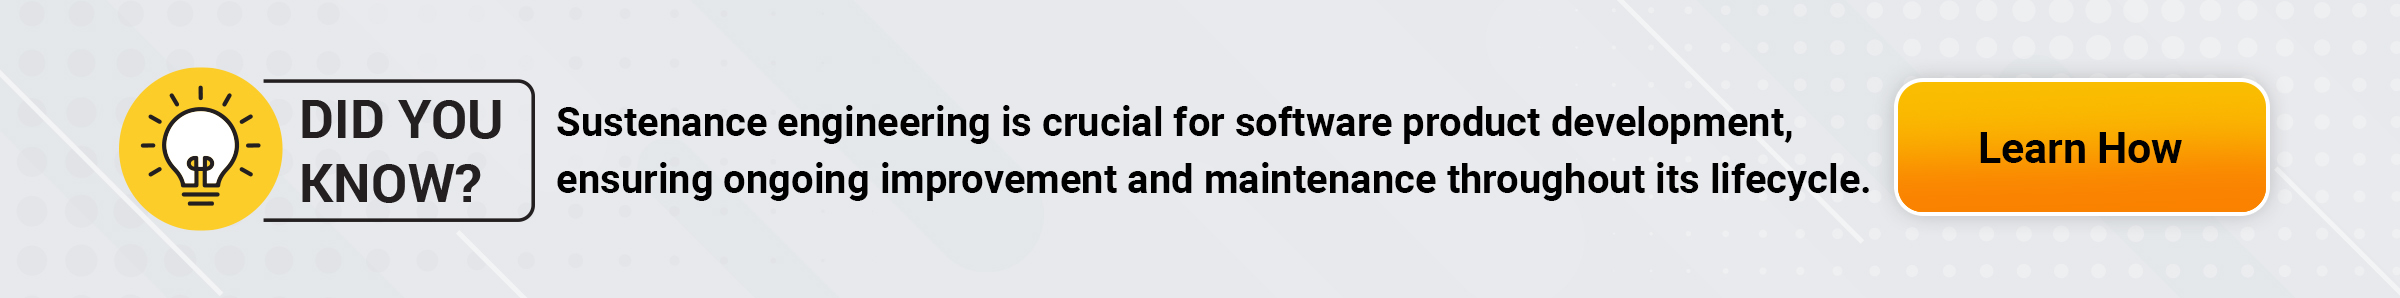 Know why Sustenance engineering is vital for software product development?